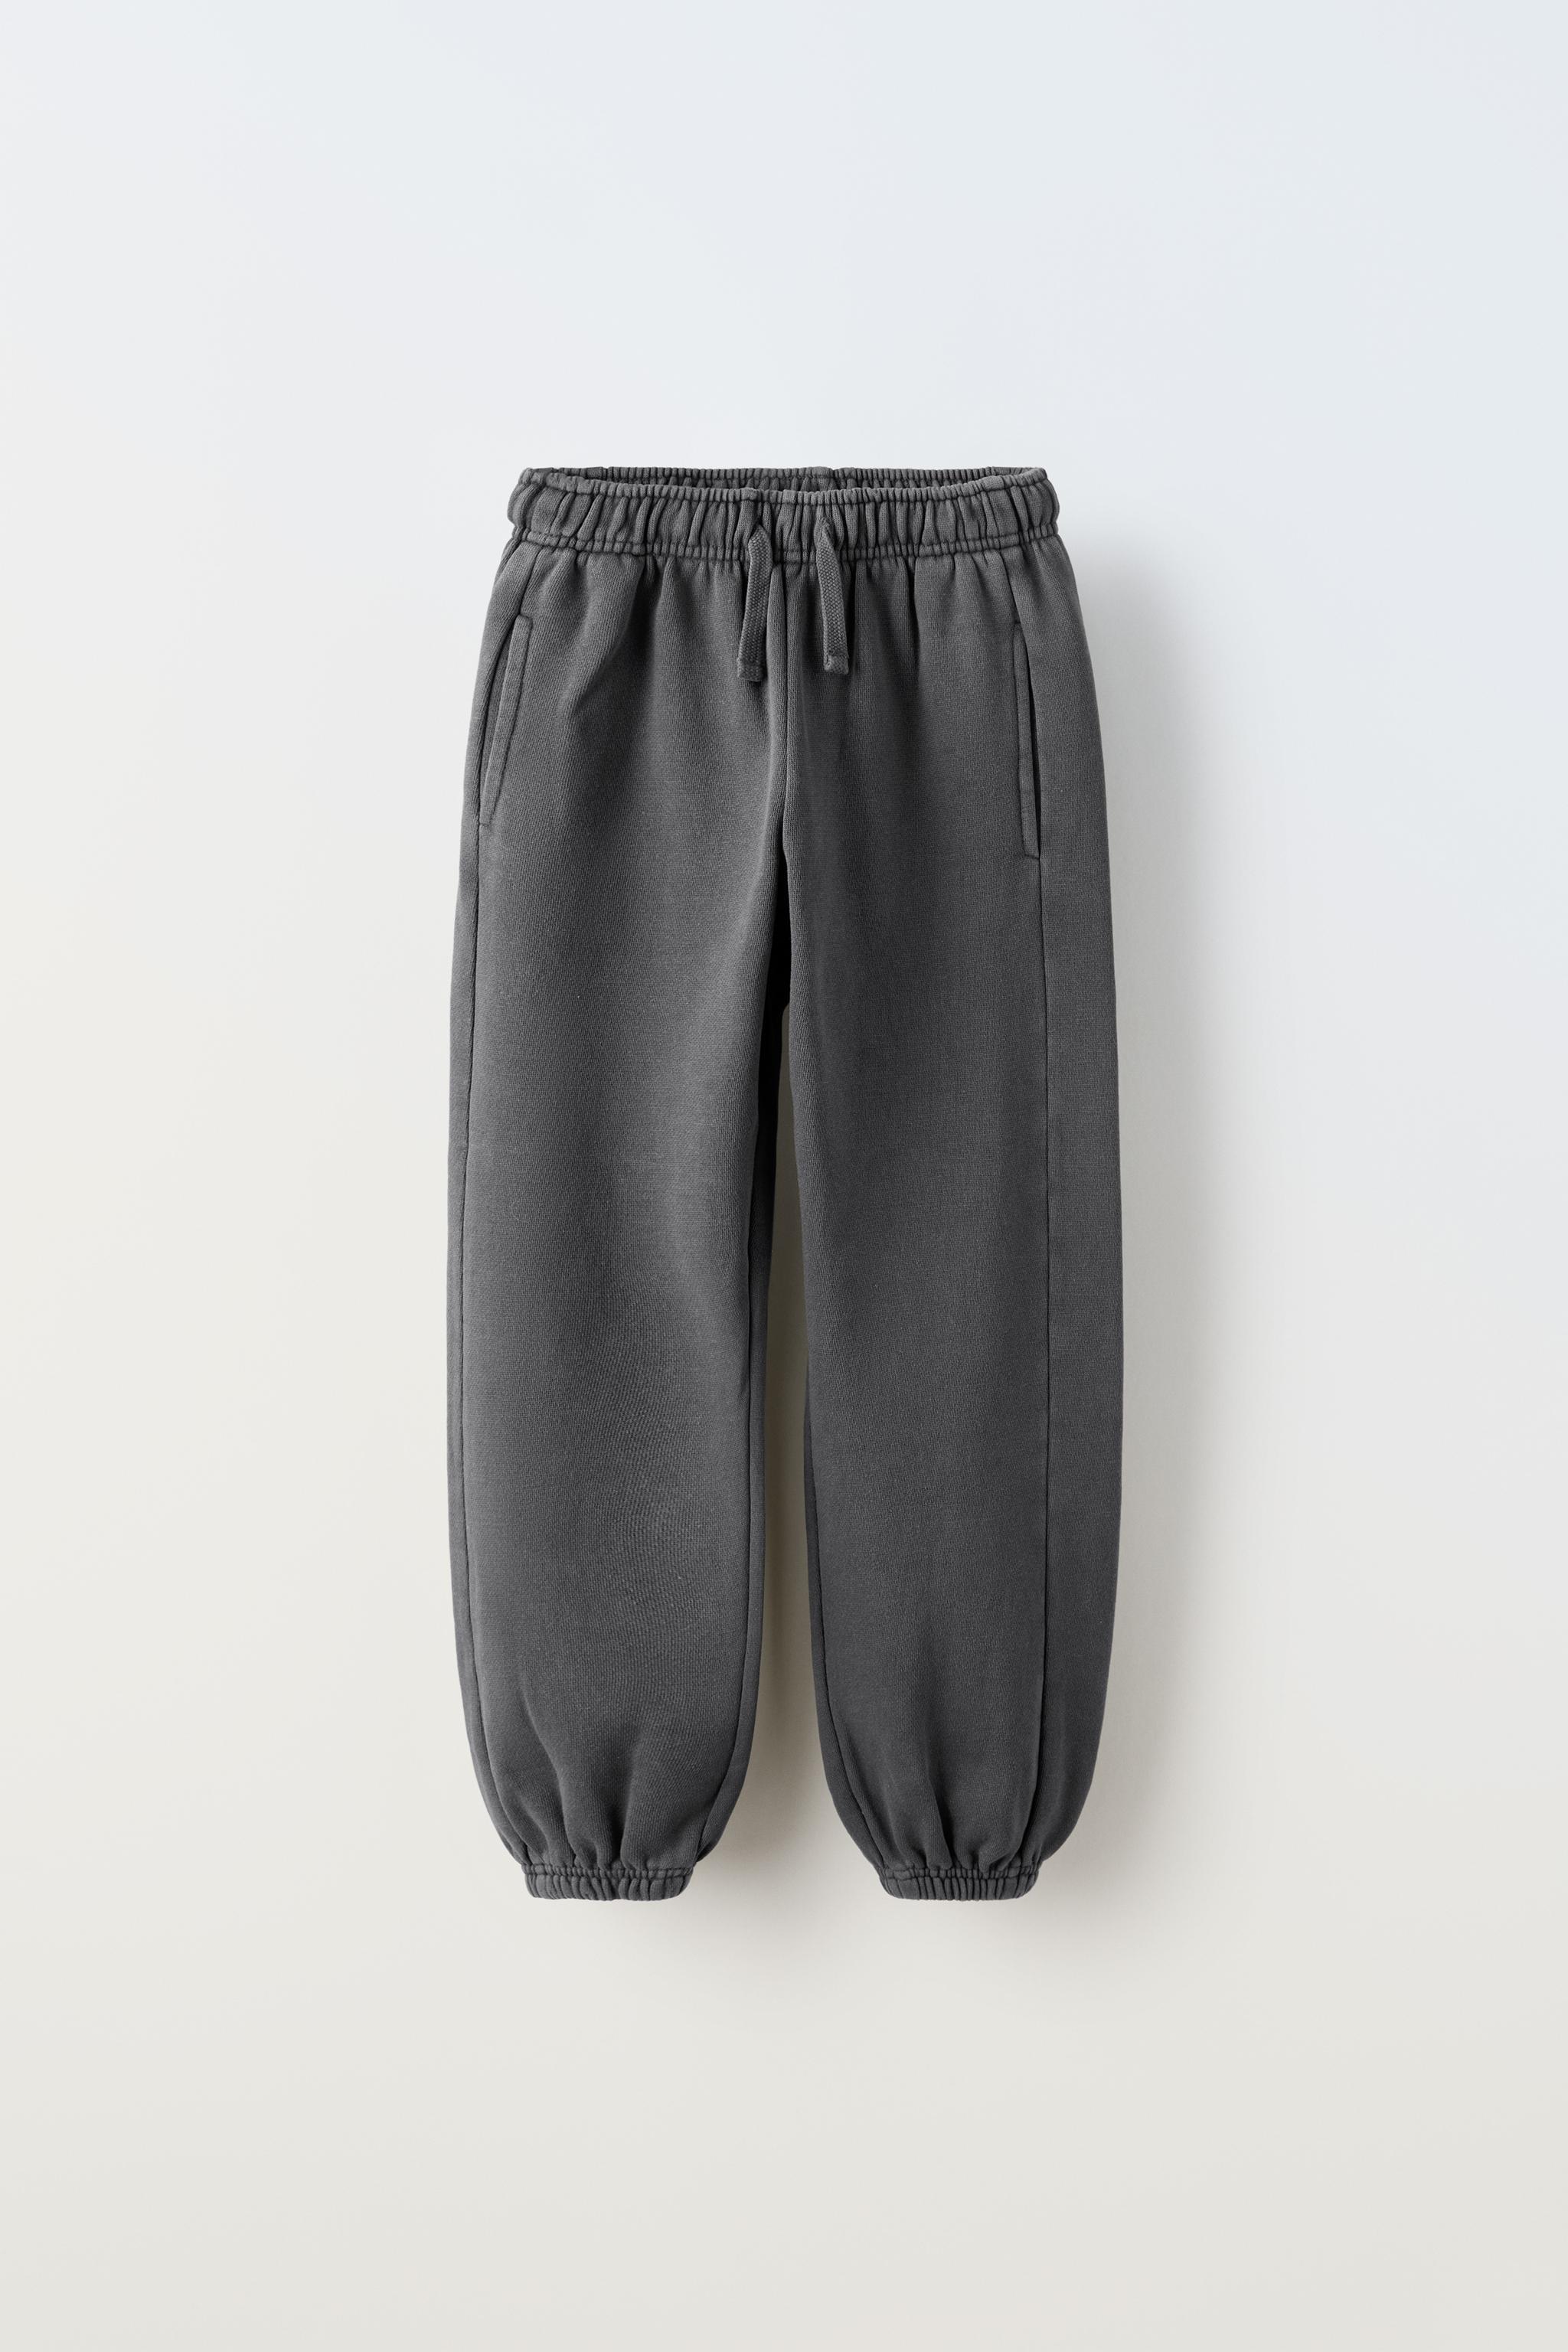 Other, Hollister Womens Sweat Pants